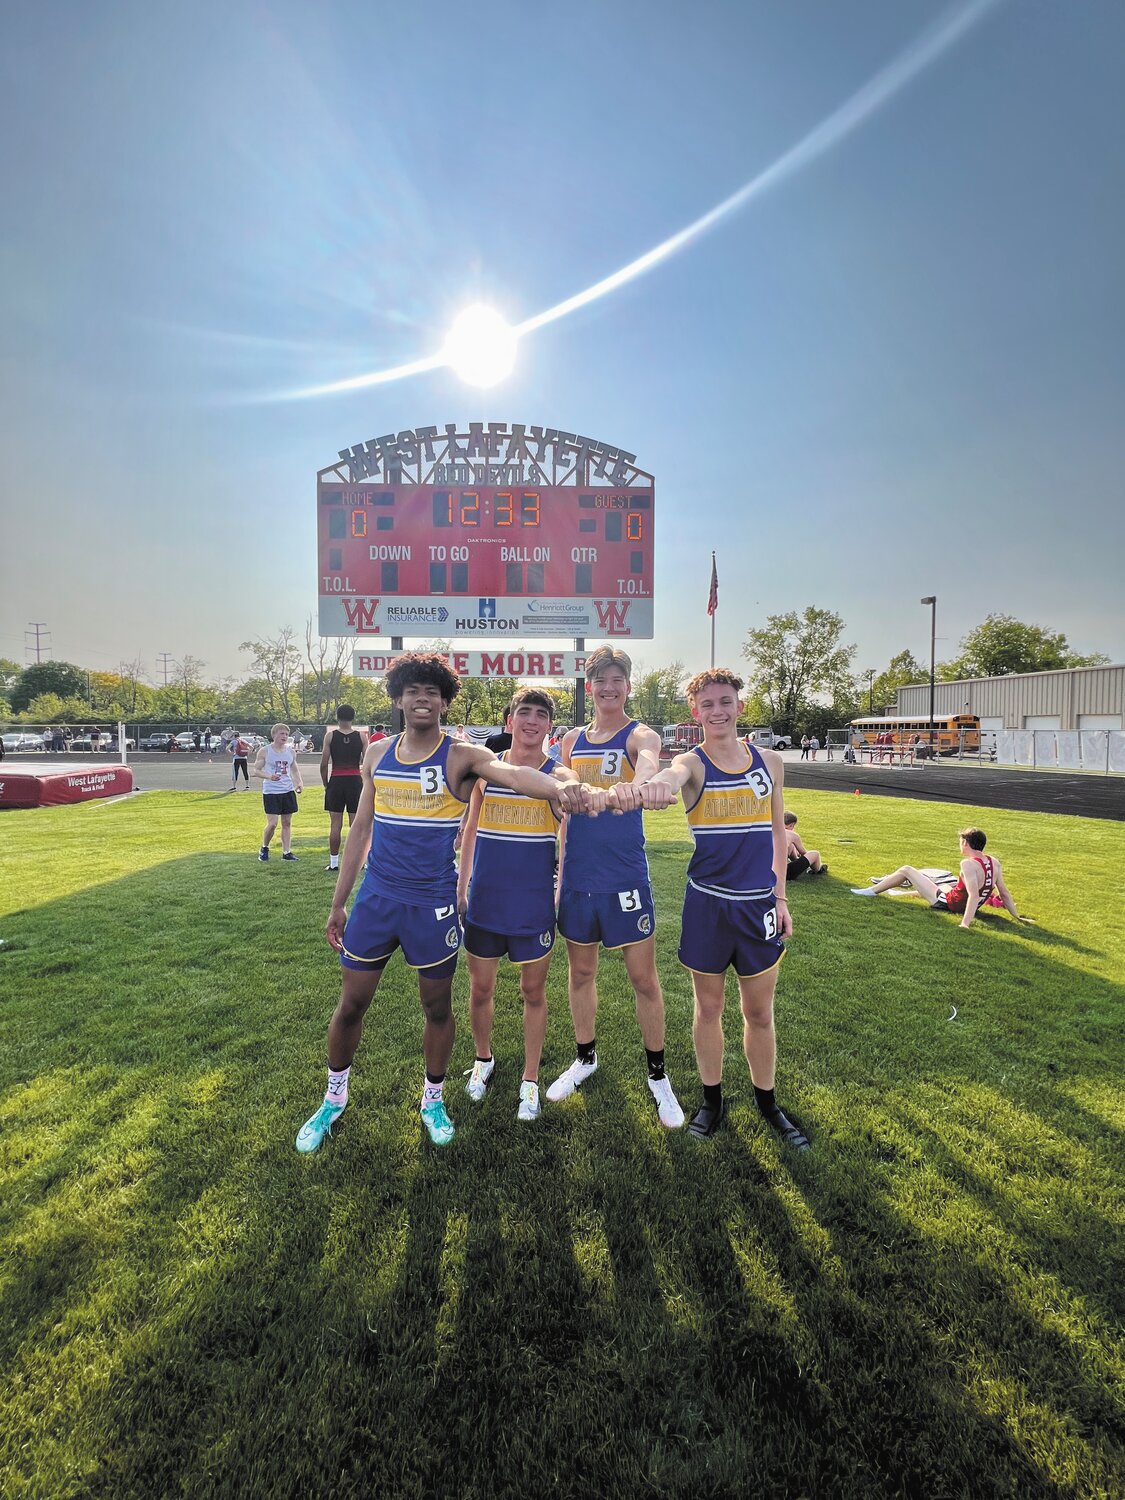 Crawfordsville's 4x800 relay team of Tyson Fuller, Max Brumett, Roman Contreras, and Ryan Miller broke the school record yet again with a time of 8:20.75 and placed 2nd to advance to next weeks' Regional